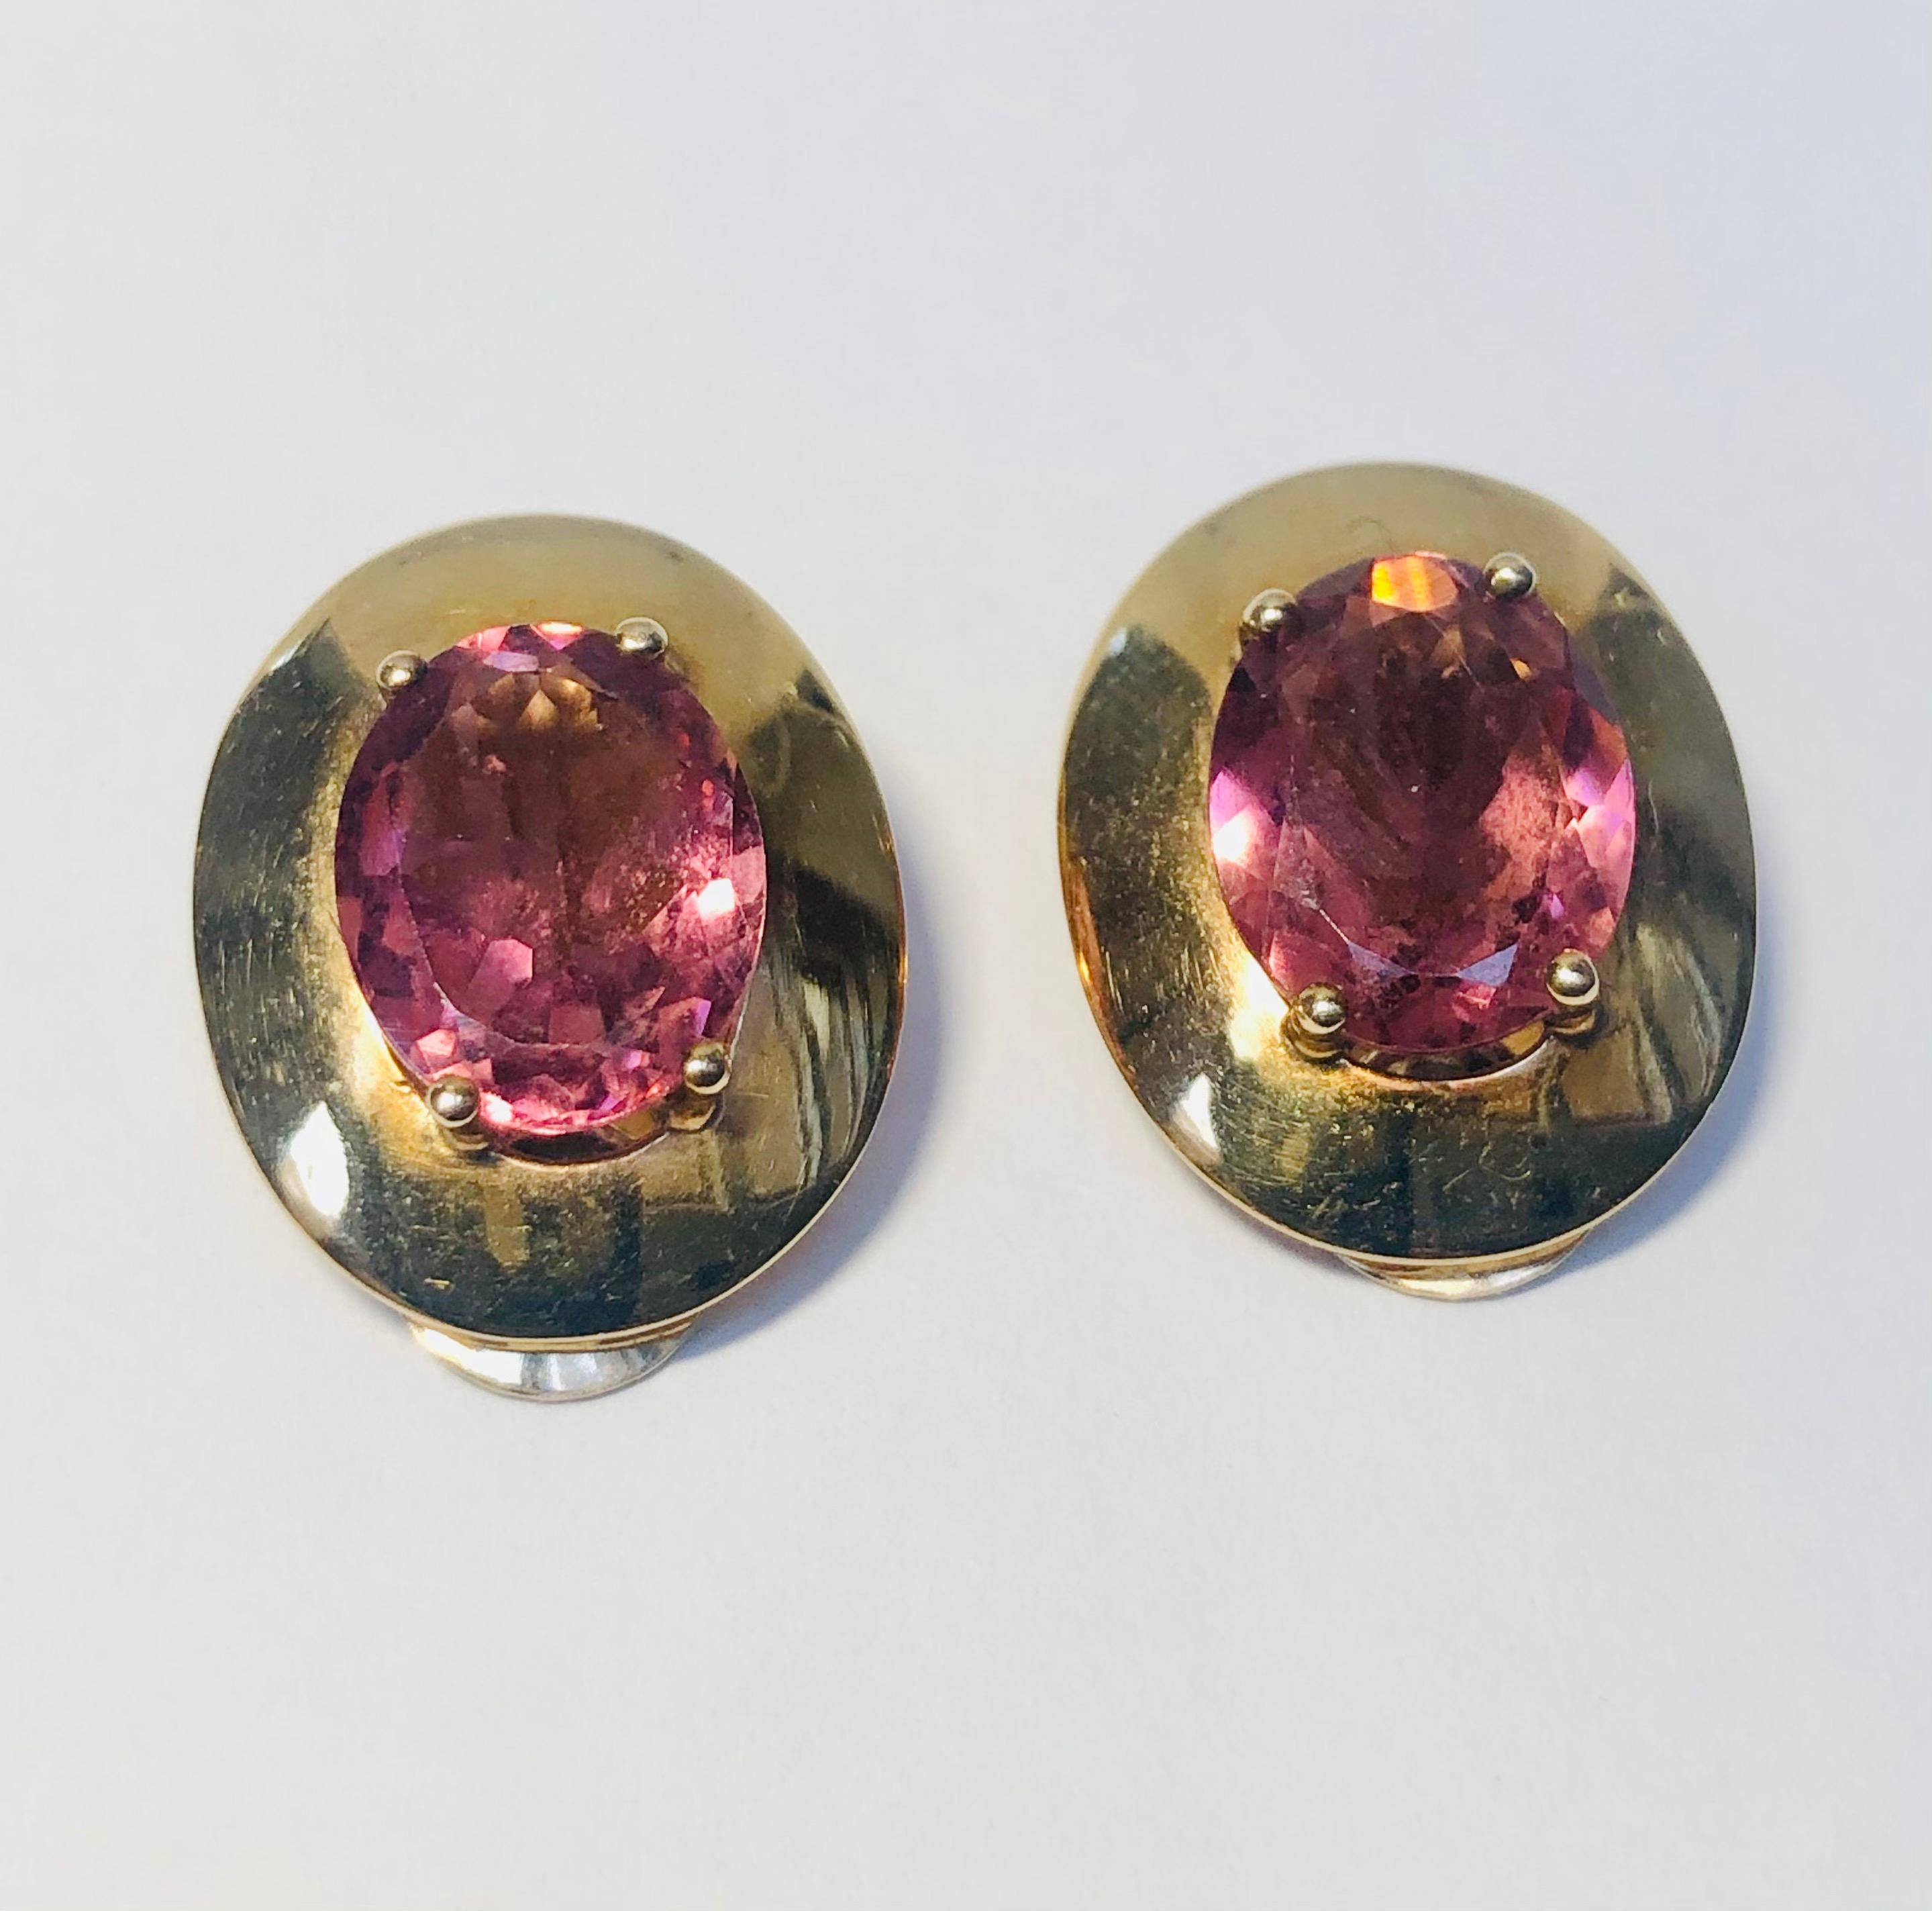 Vintage Pink Tourmaline 9kt Yellow Gold Ear Clips. Tourmaline dimensions 1.3 cm length and 1.0 cm width. Earring dimensions 1.8 cm length by 1.5 cm width and 1.0 cm depth. Ear clip fastening. The tourmaline gem stones are oval and mixed cut.